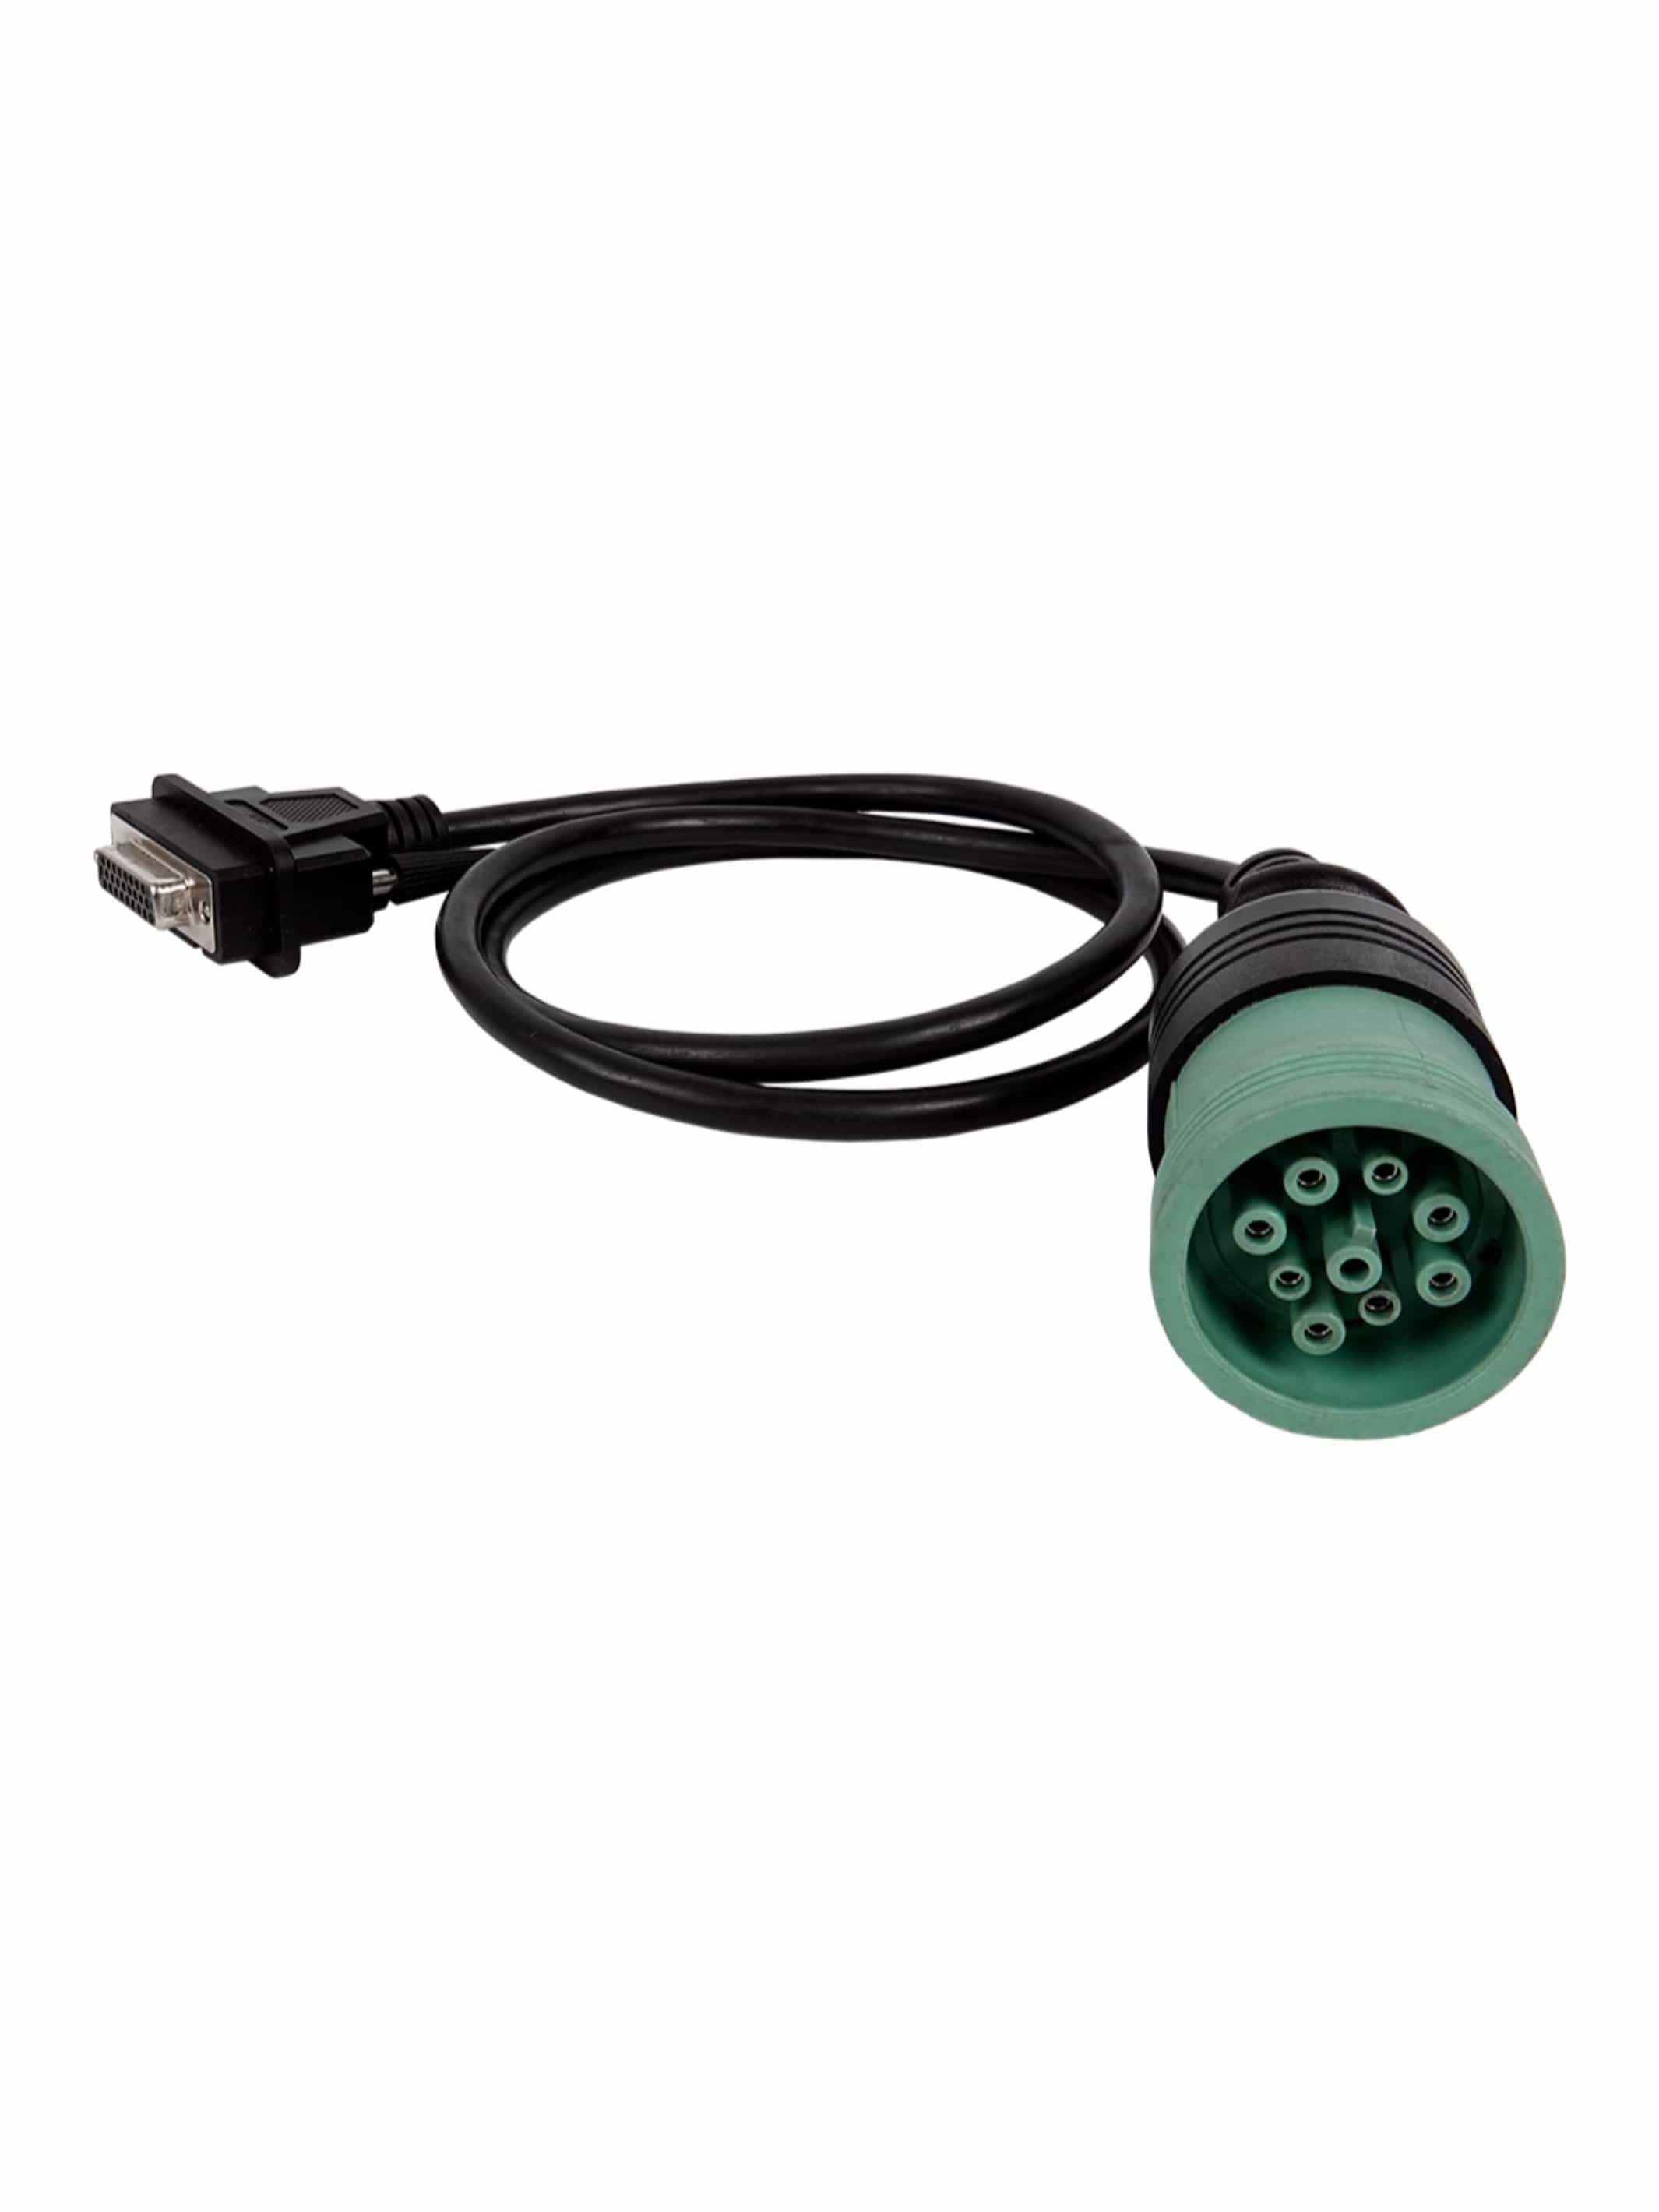 JDC217.9 Deutsch 9 Pin Type 2 Green Diagnostics Cable - Jaltest Agricultural, Construction, Heavy Equipment MH & Power Systems Diagnostic Tool Kit